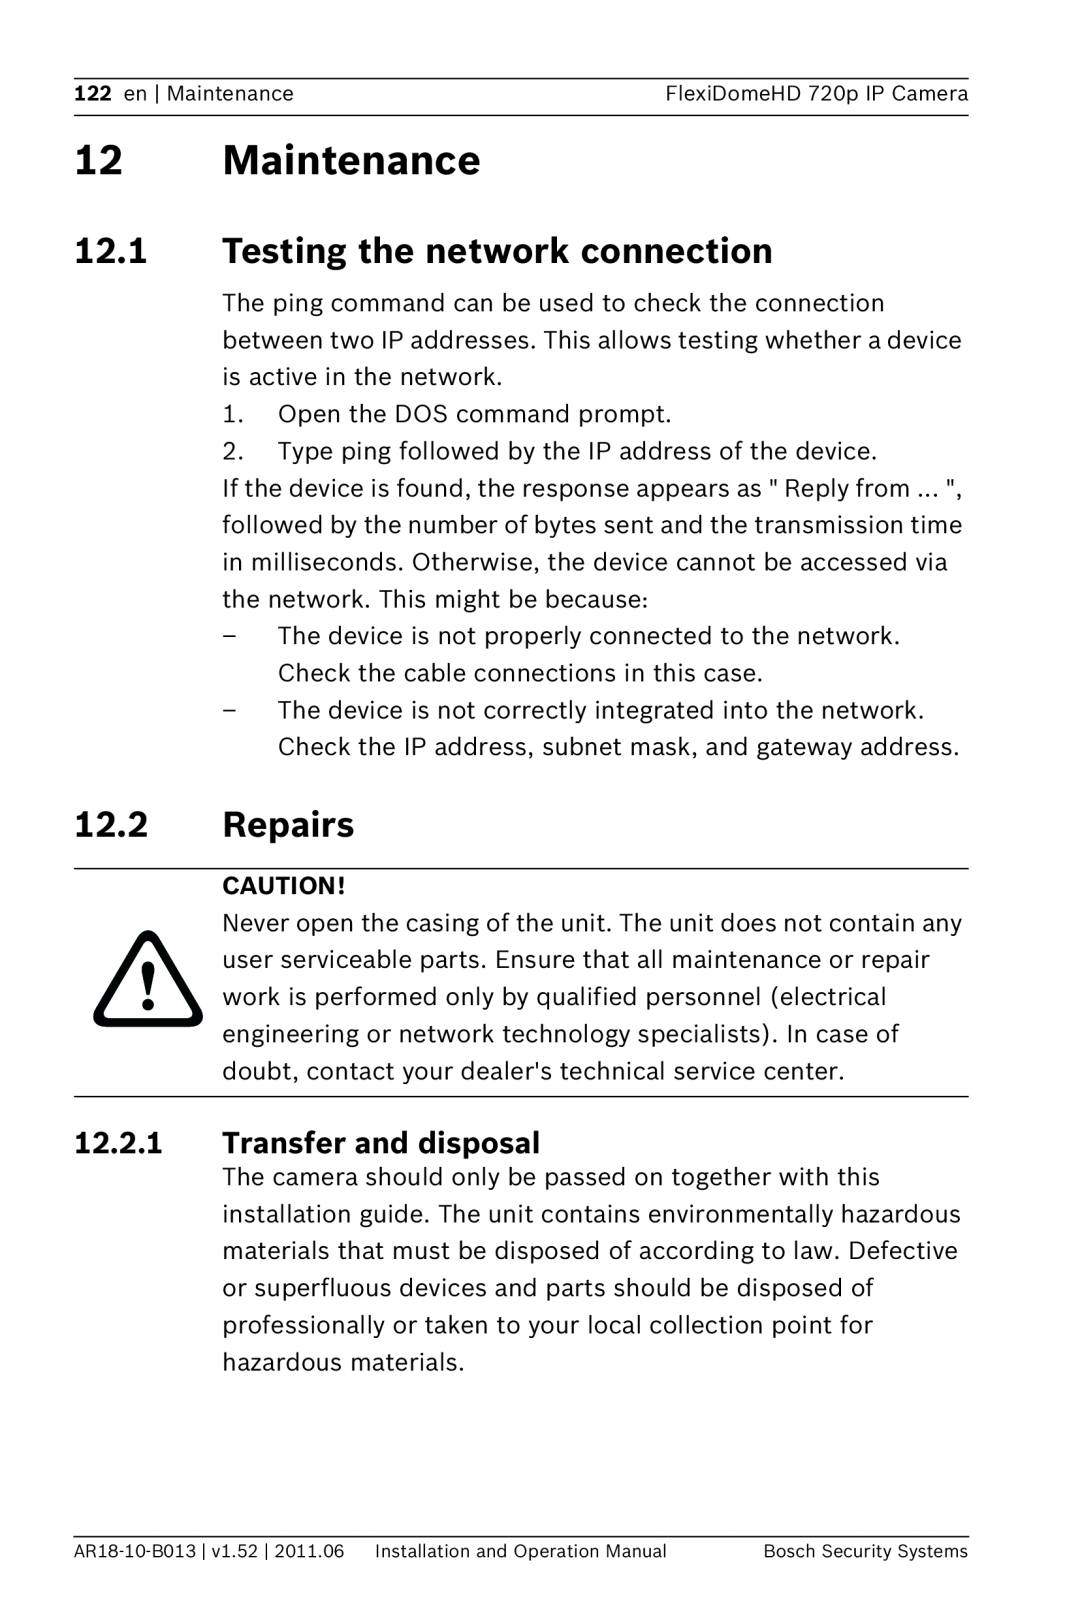 Bosch Appliances NDN-921 Maintenance, 12.1Testing the network connection, 12.2Repairs, 12.2.1Transfer and disposal 